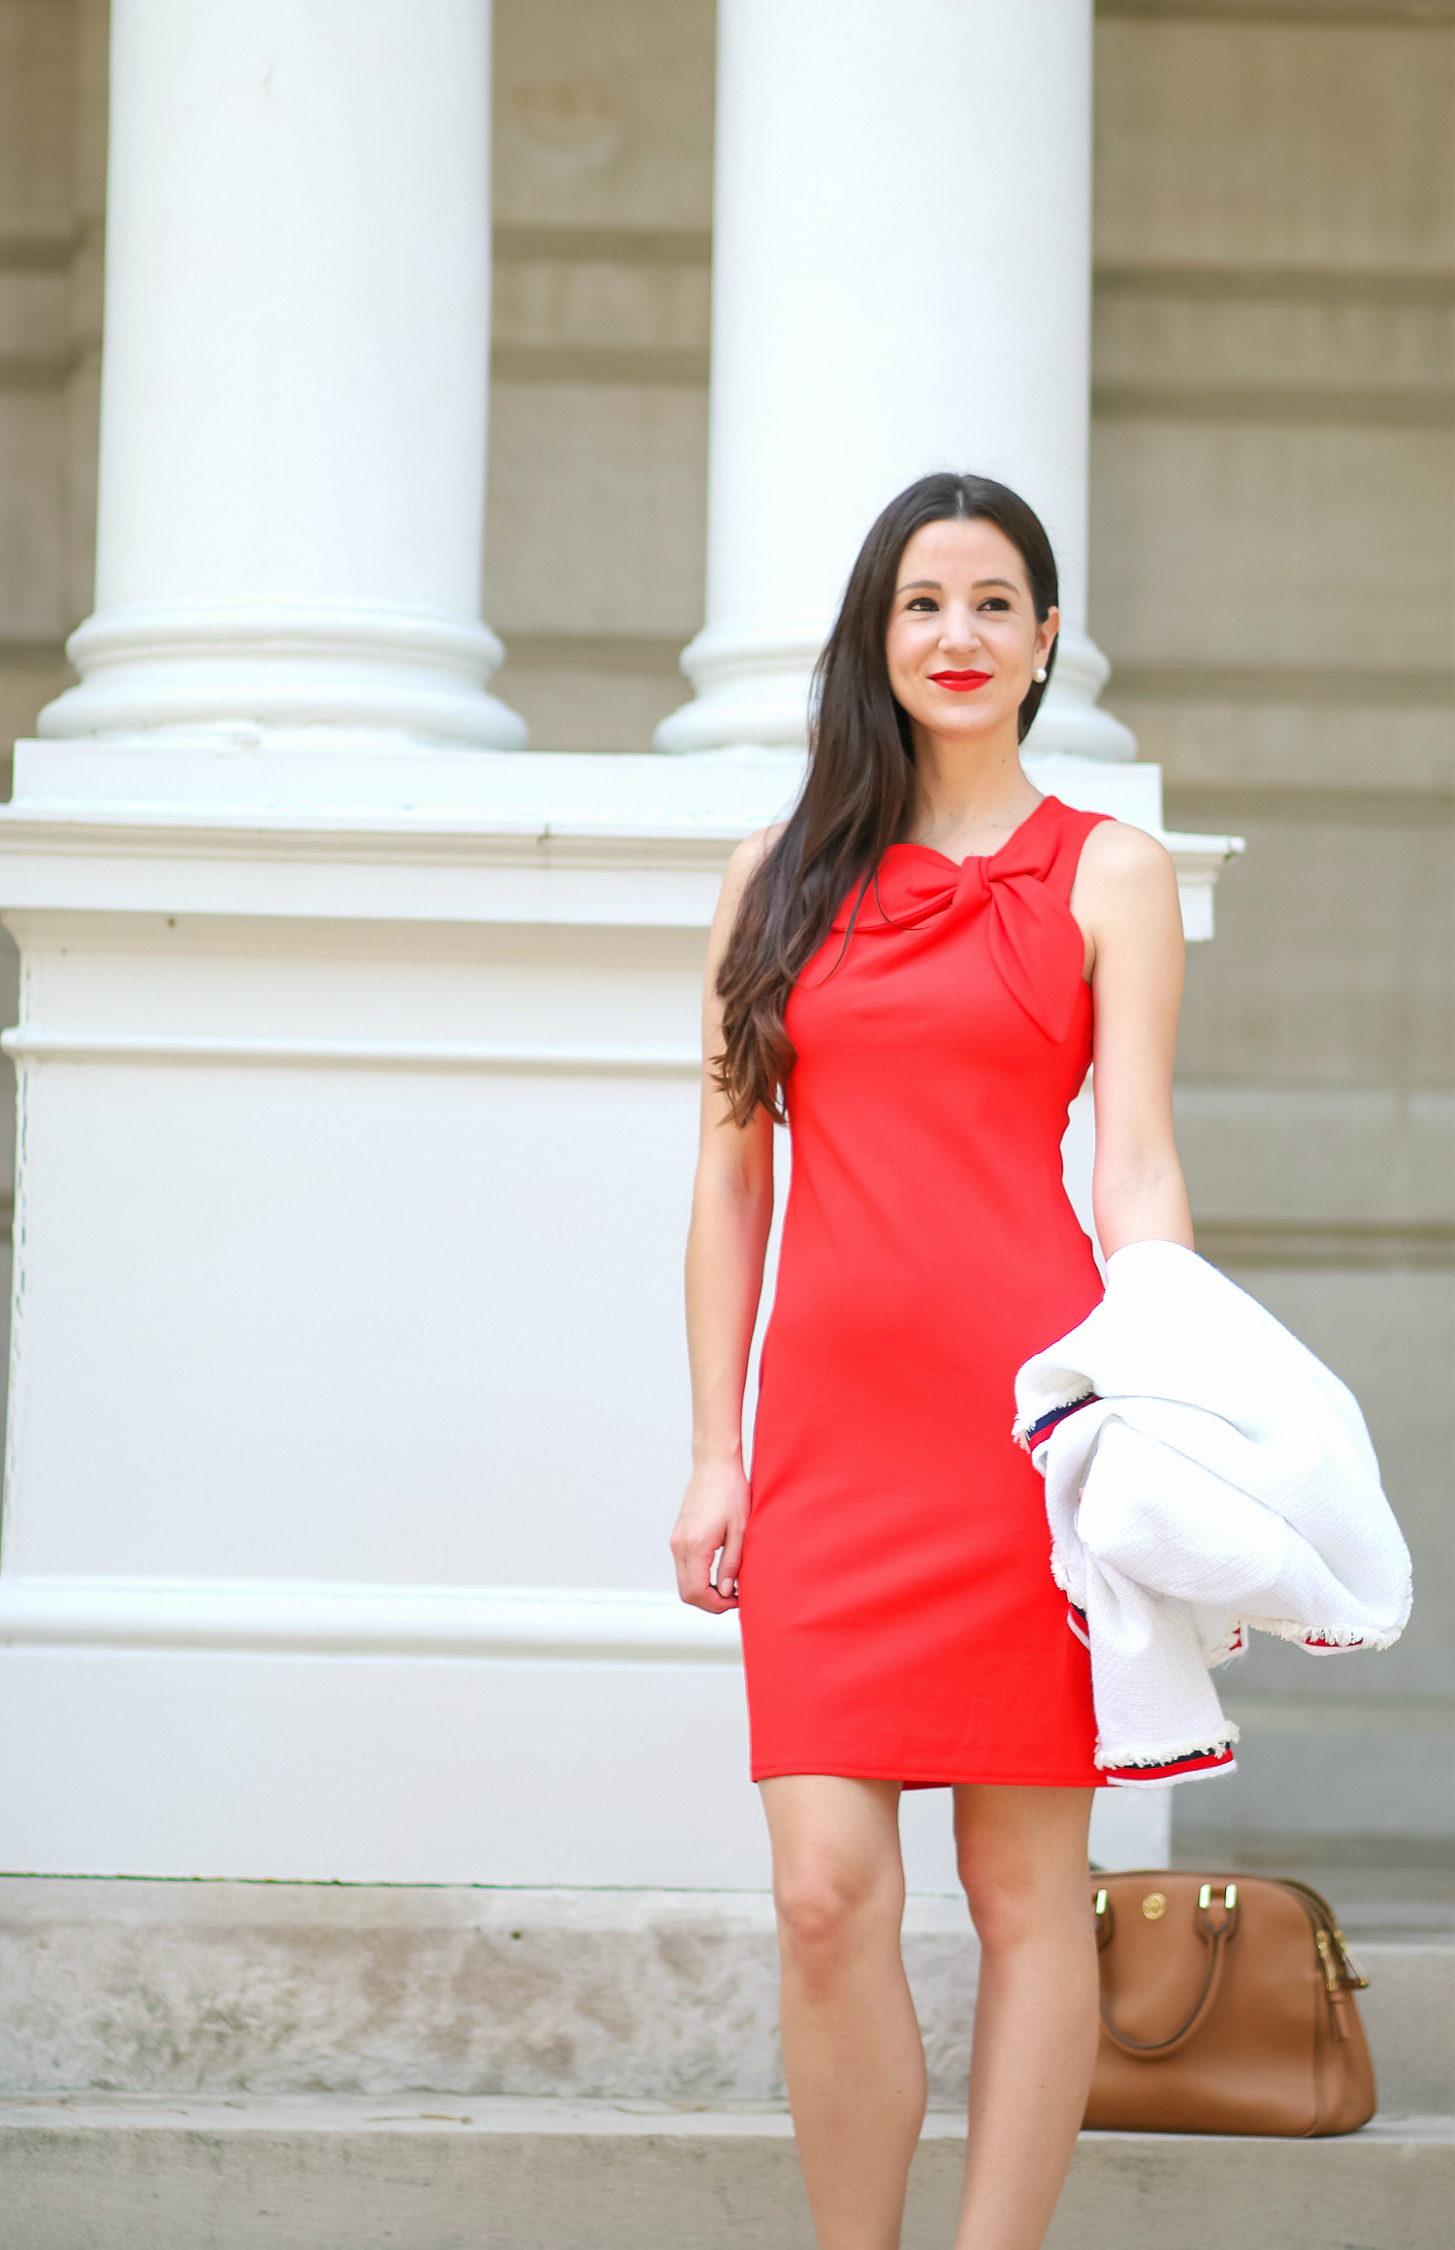 Red Jackie O sheath dress and white tweed jacket | Dressy casual Labor Day outfit idea by fashion blogger Stephanie Ziajka from Diary of a Debutante